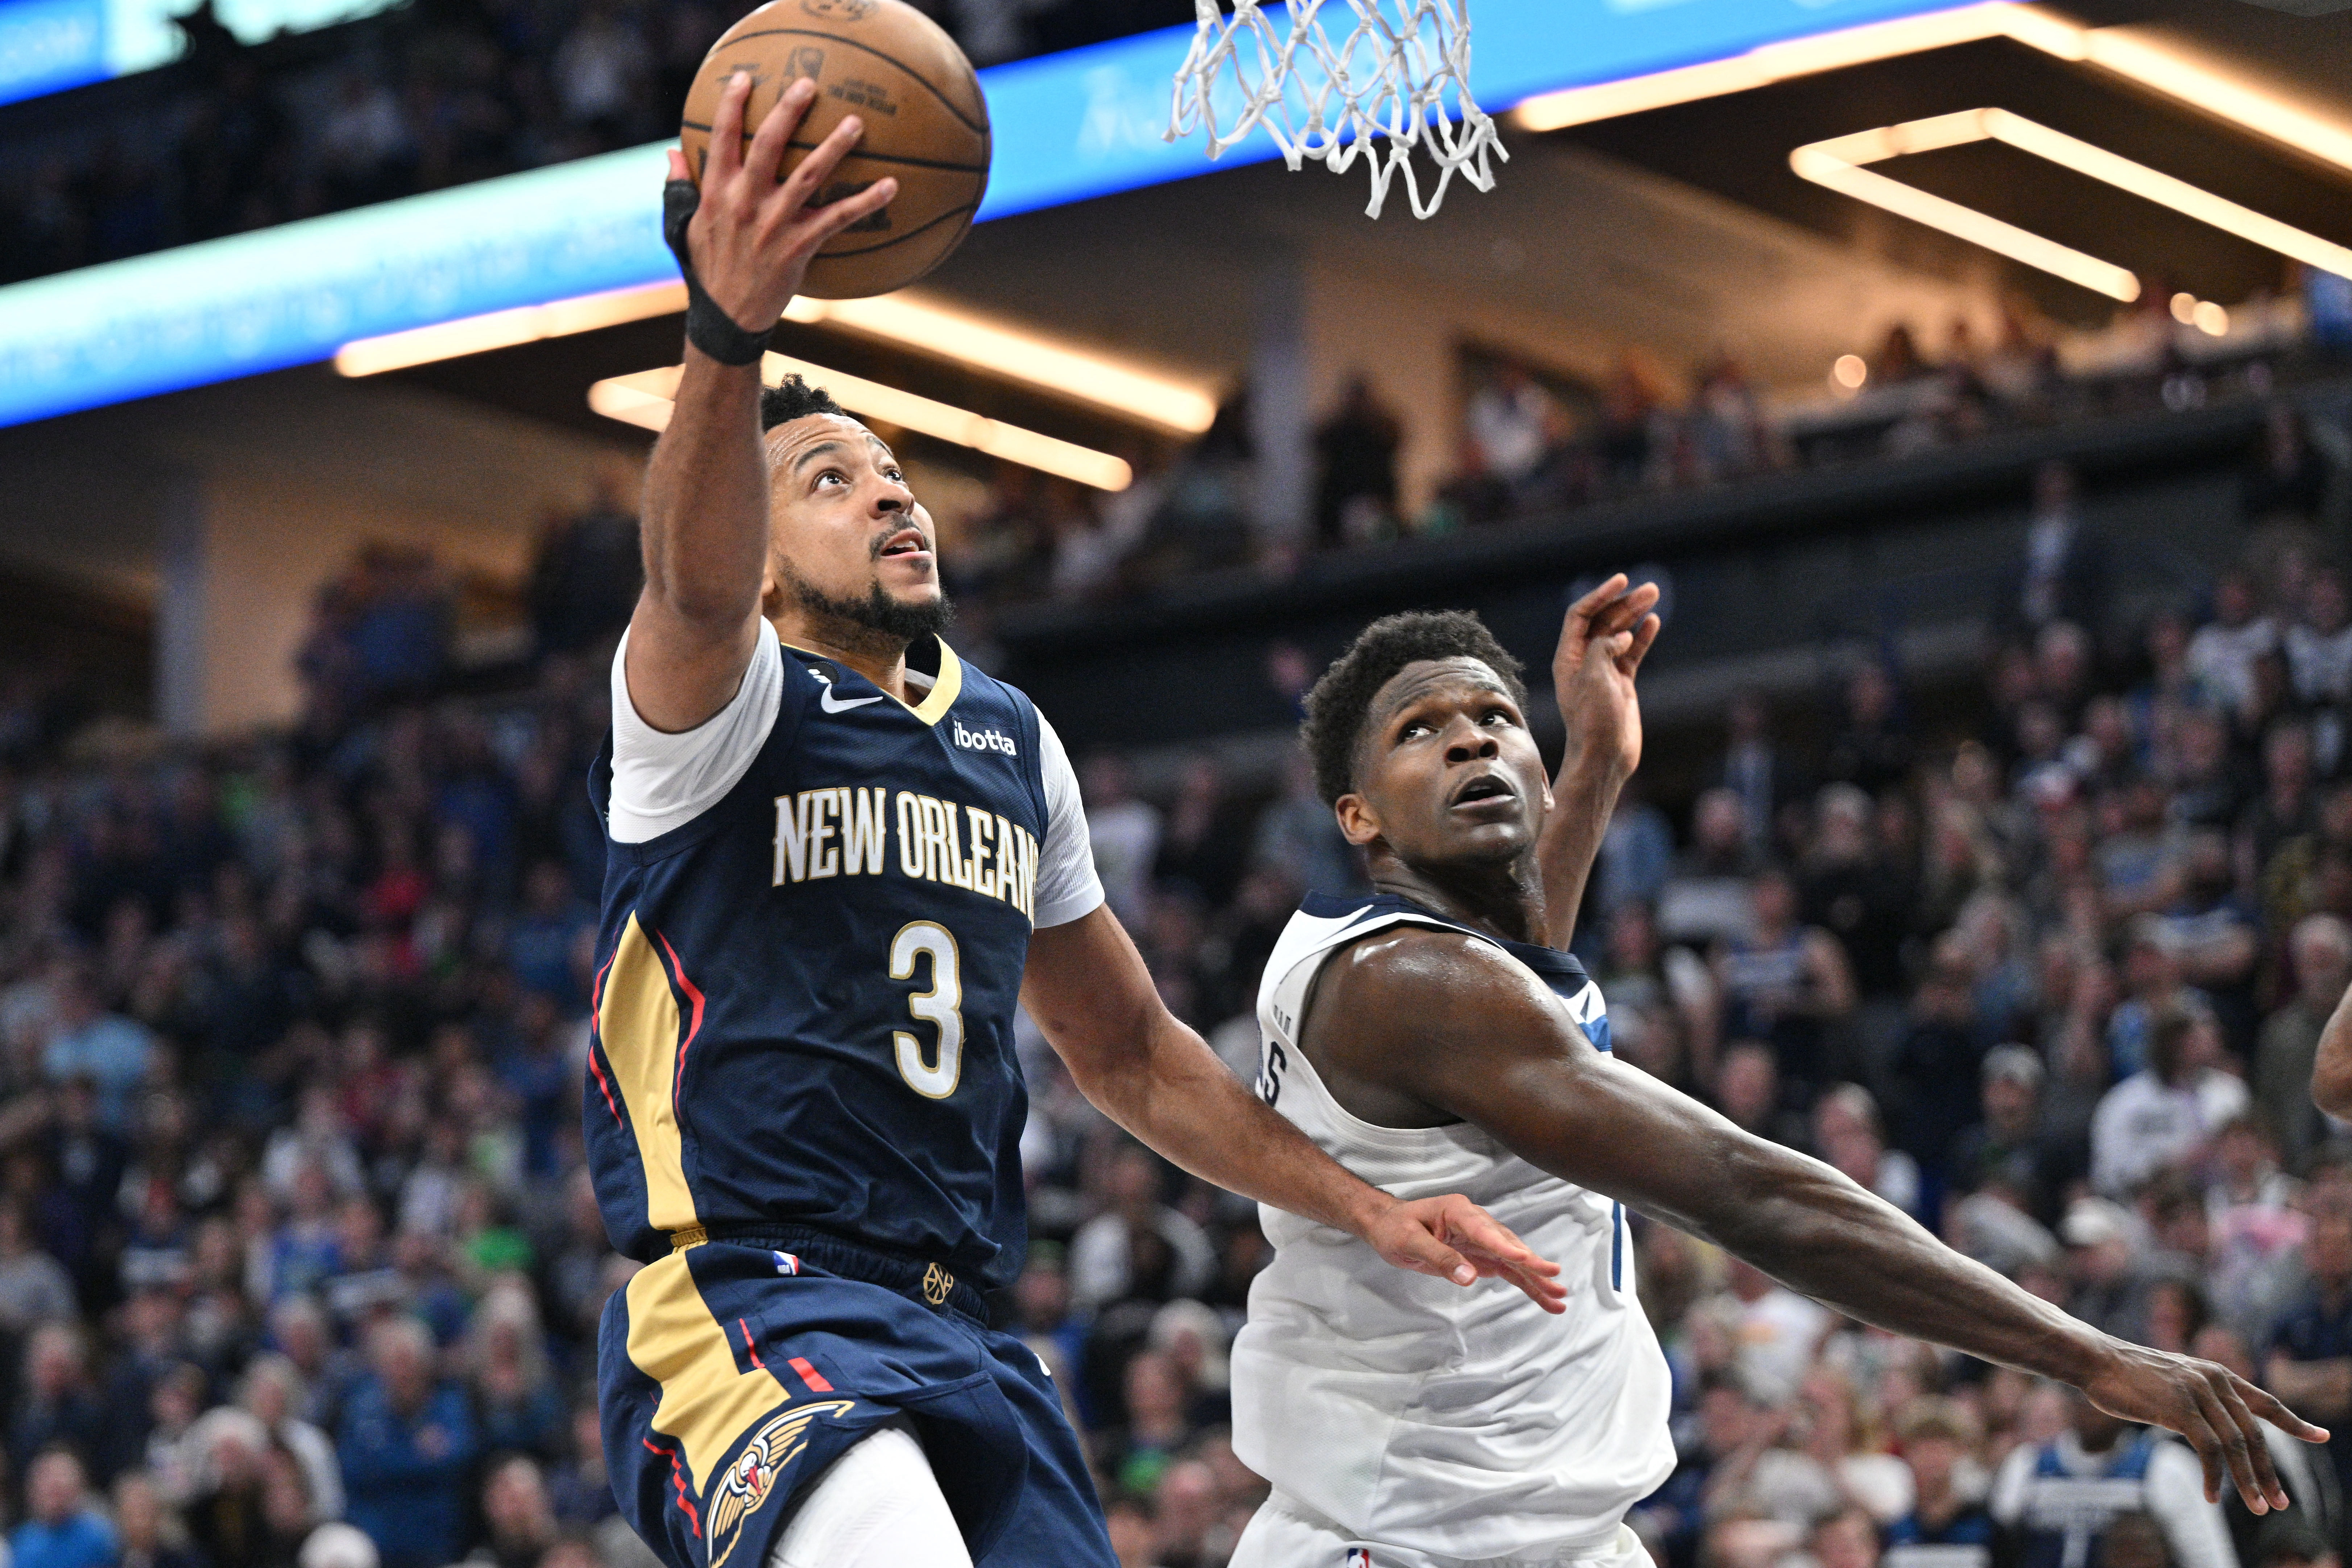 Karl-Anthony Towns paces Timberwolves past Pelicans